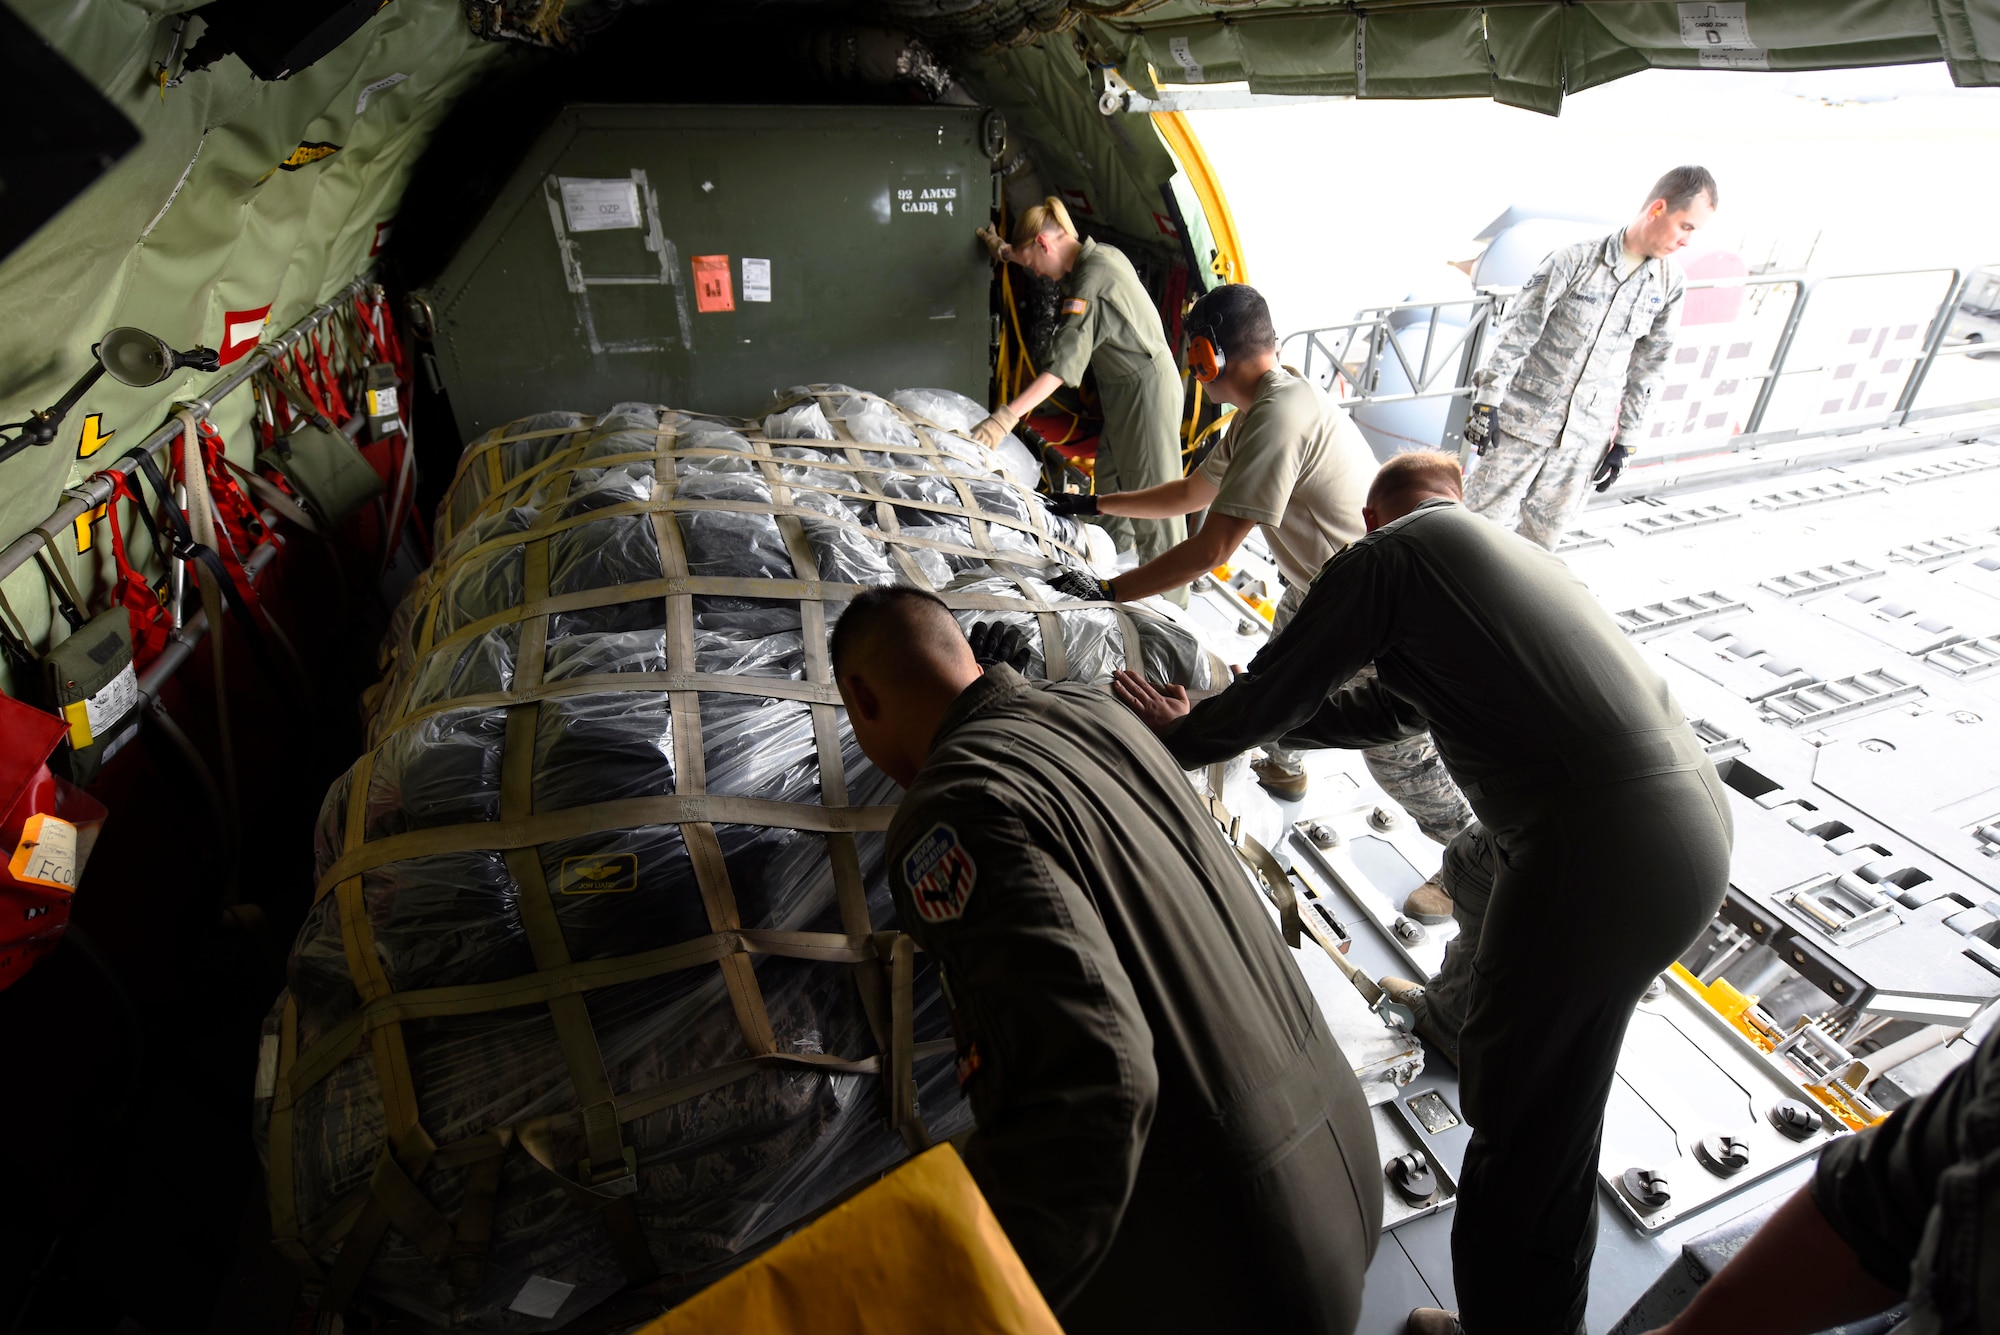 Airmen from the 92nd Air Refueling Squadron and Logistics Readiness Squadron push cargo into a KC-135 Stratotanker at Fairchild Air Force Base, Washington, September 2018. Mobility Airmen fuel the fight, provide airlift needed for supplies and personnel, and enable versatile and timely effects through contingency response ensuring mission success. (U.S. Air Force photo/Airman 1st Class Lawrence Sena)